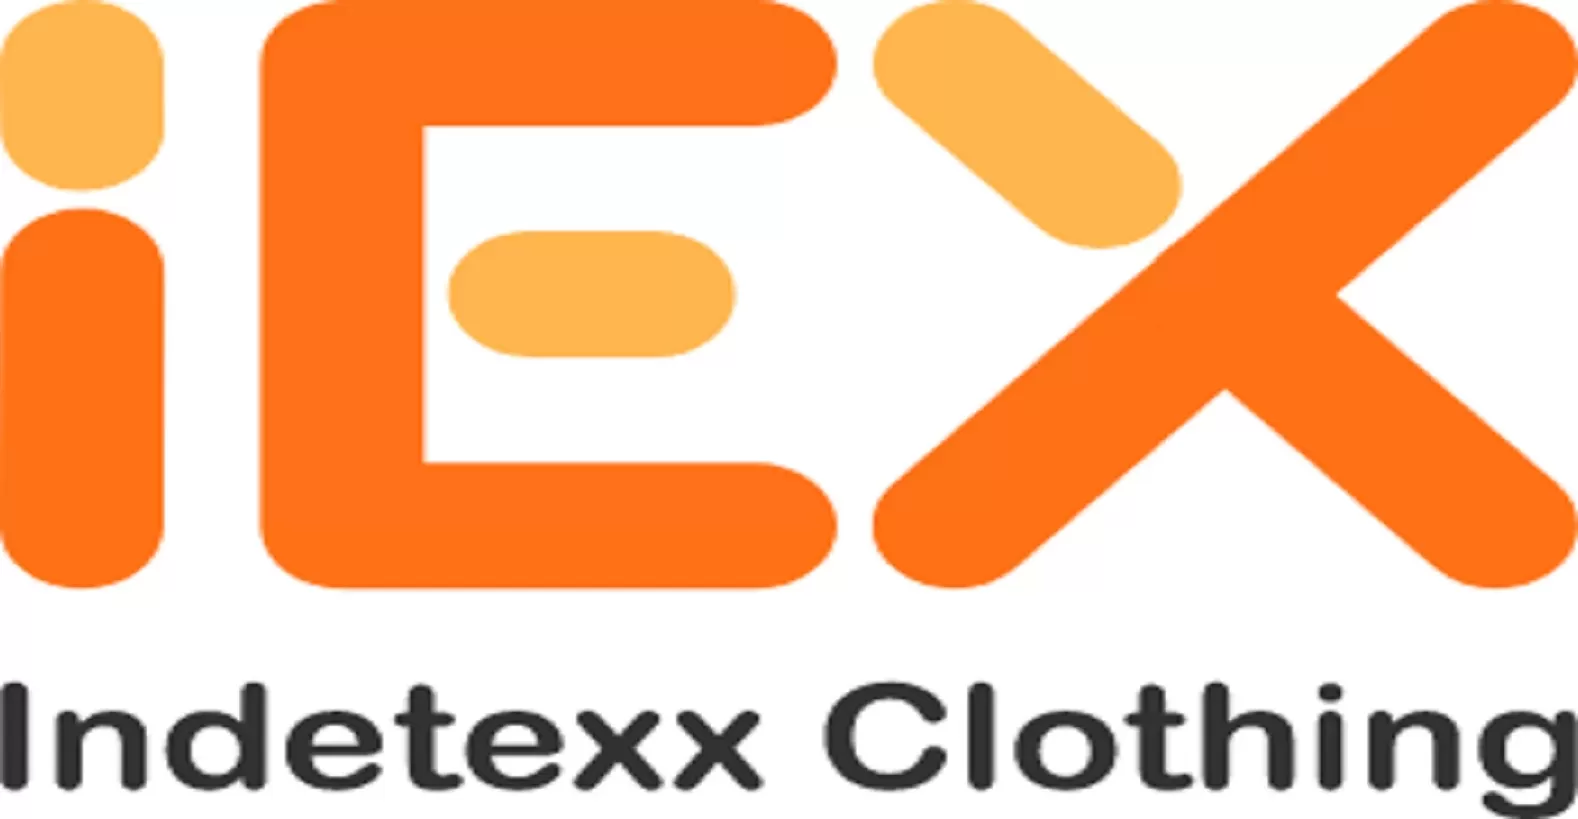 Indetexx Clothing Co.,Ltd